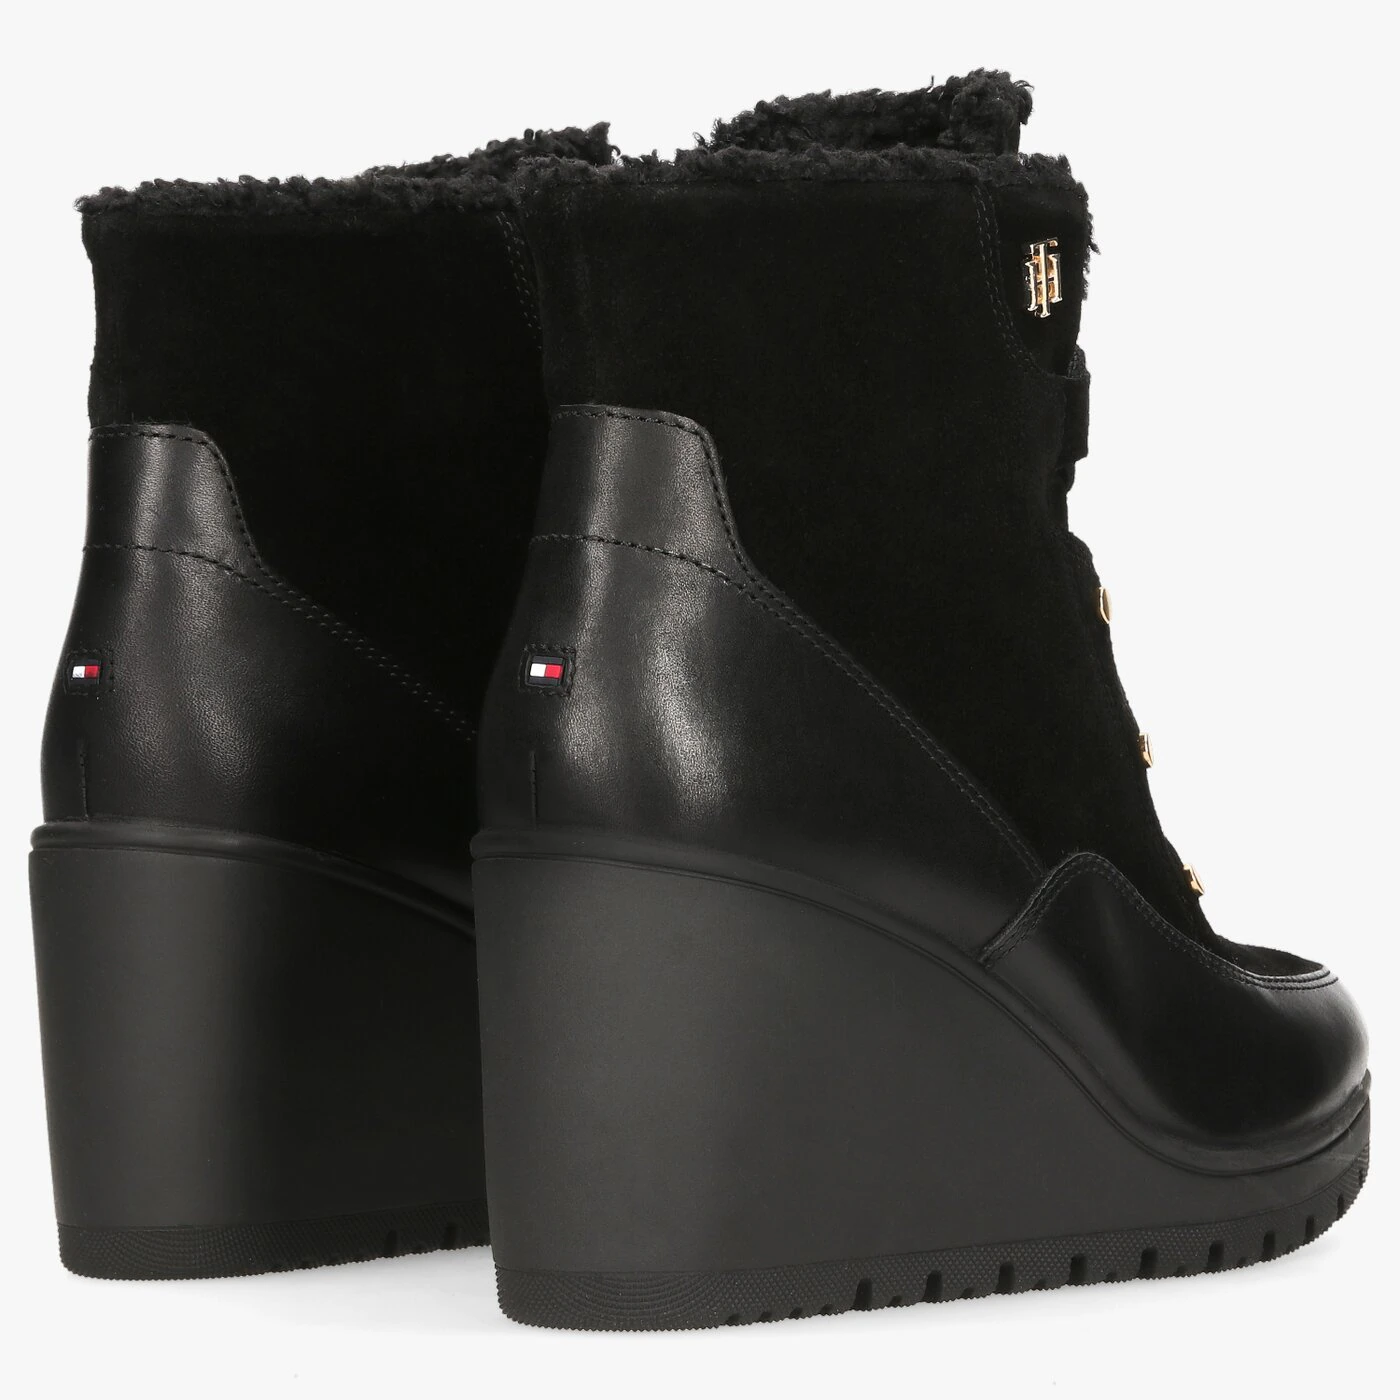 TOMMY HILFIGER WARMLINED MID WEDGE BOOT